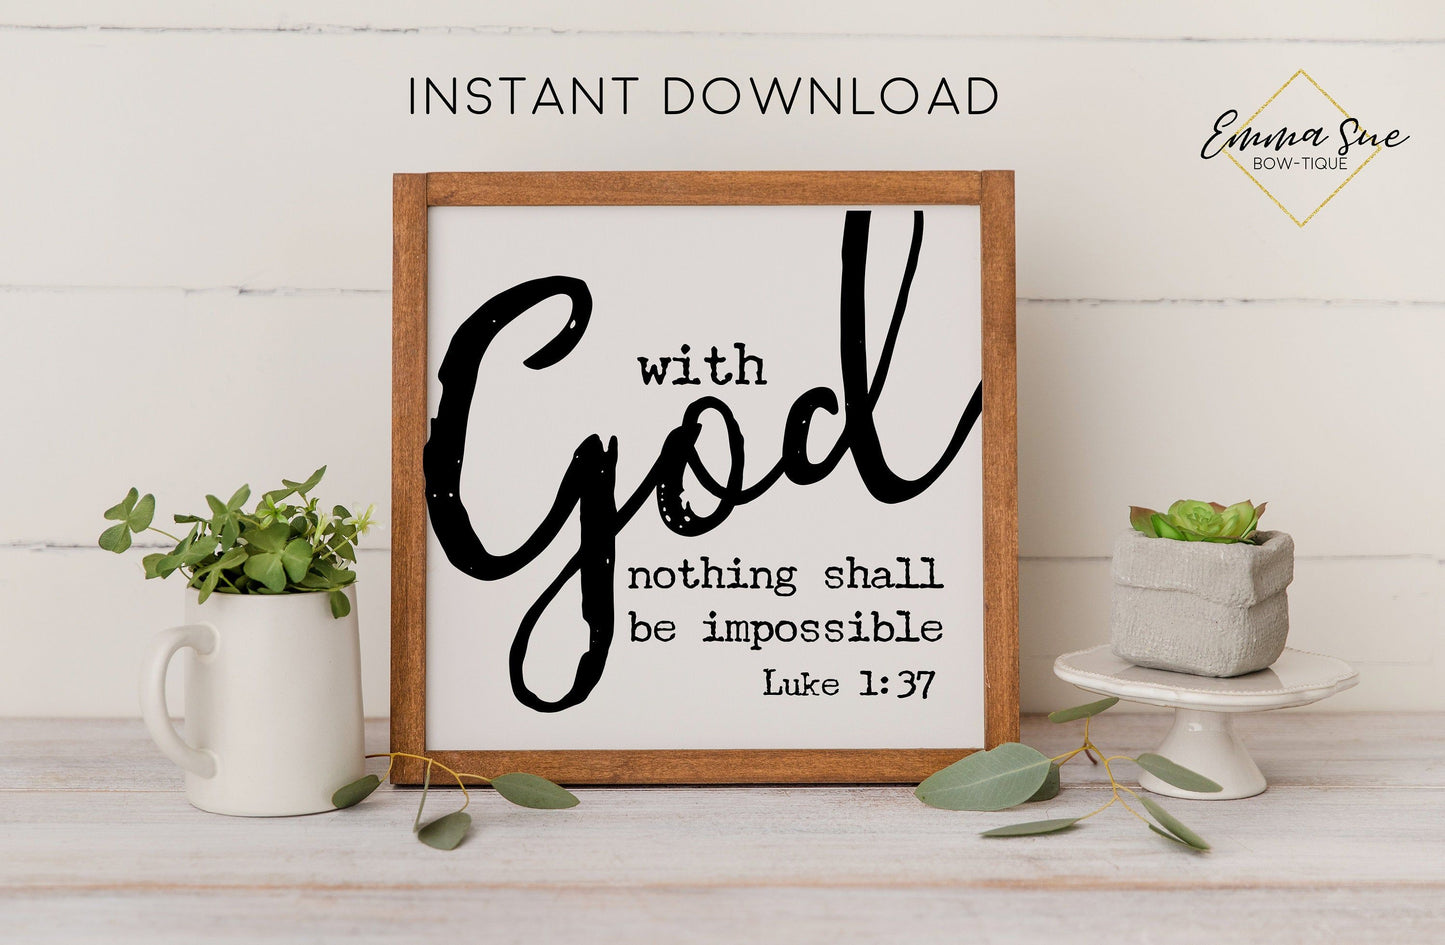 With God nothing is impossible Luke 1:37 Bible Verse Christian Farmhouse Printable Art Sign Digital File